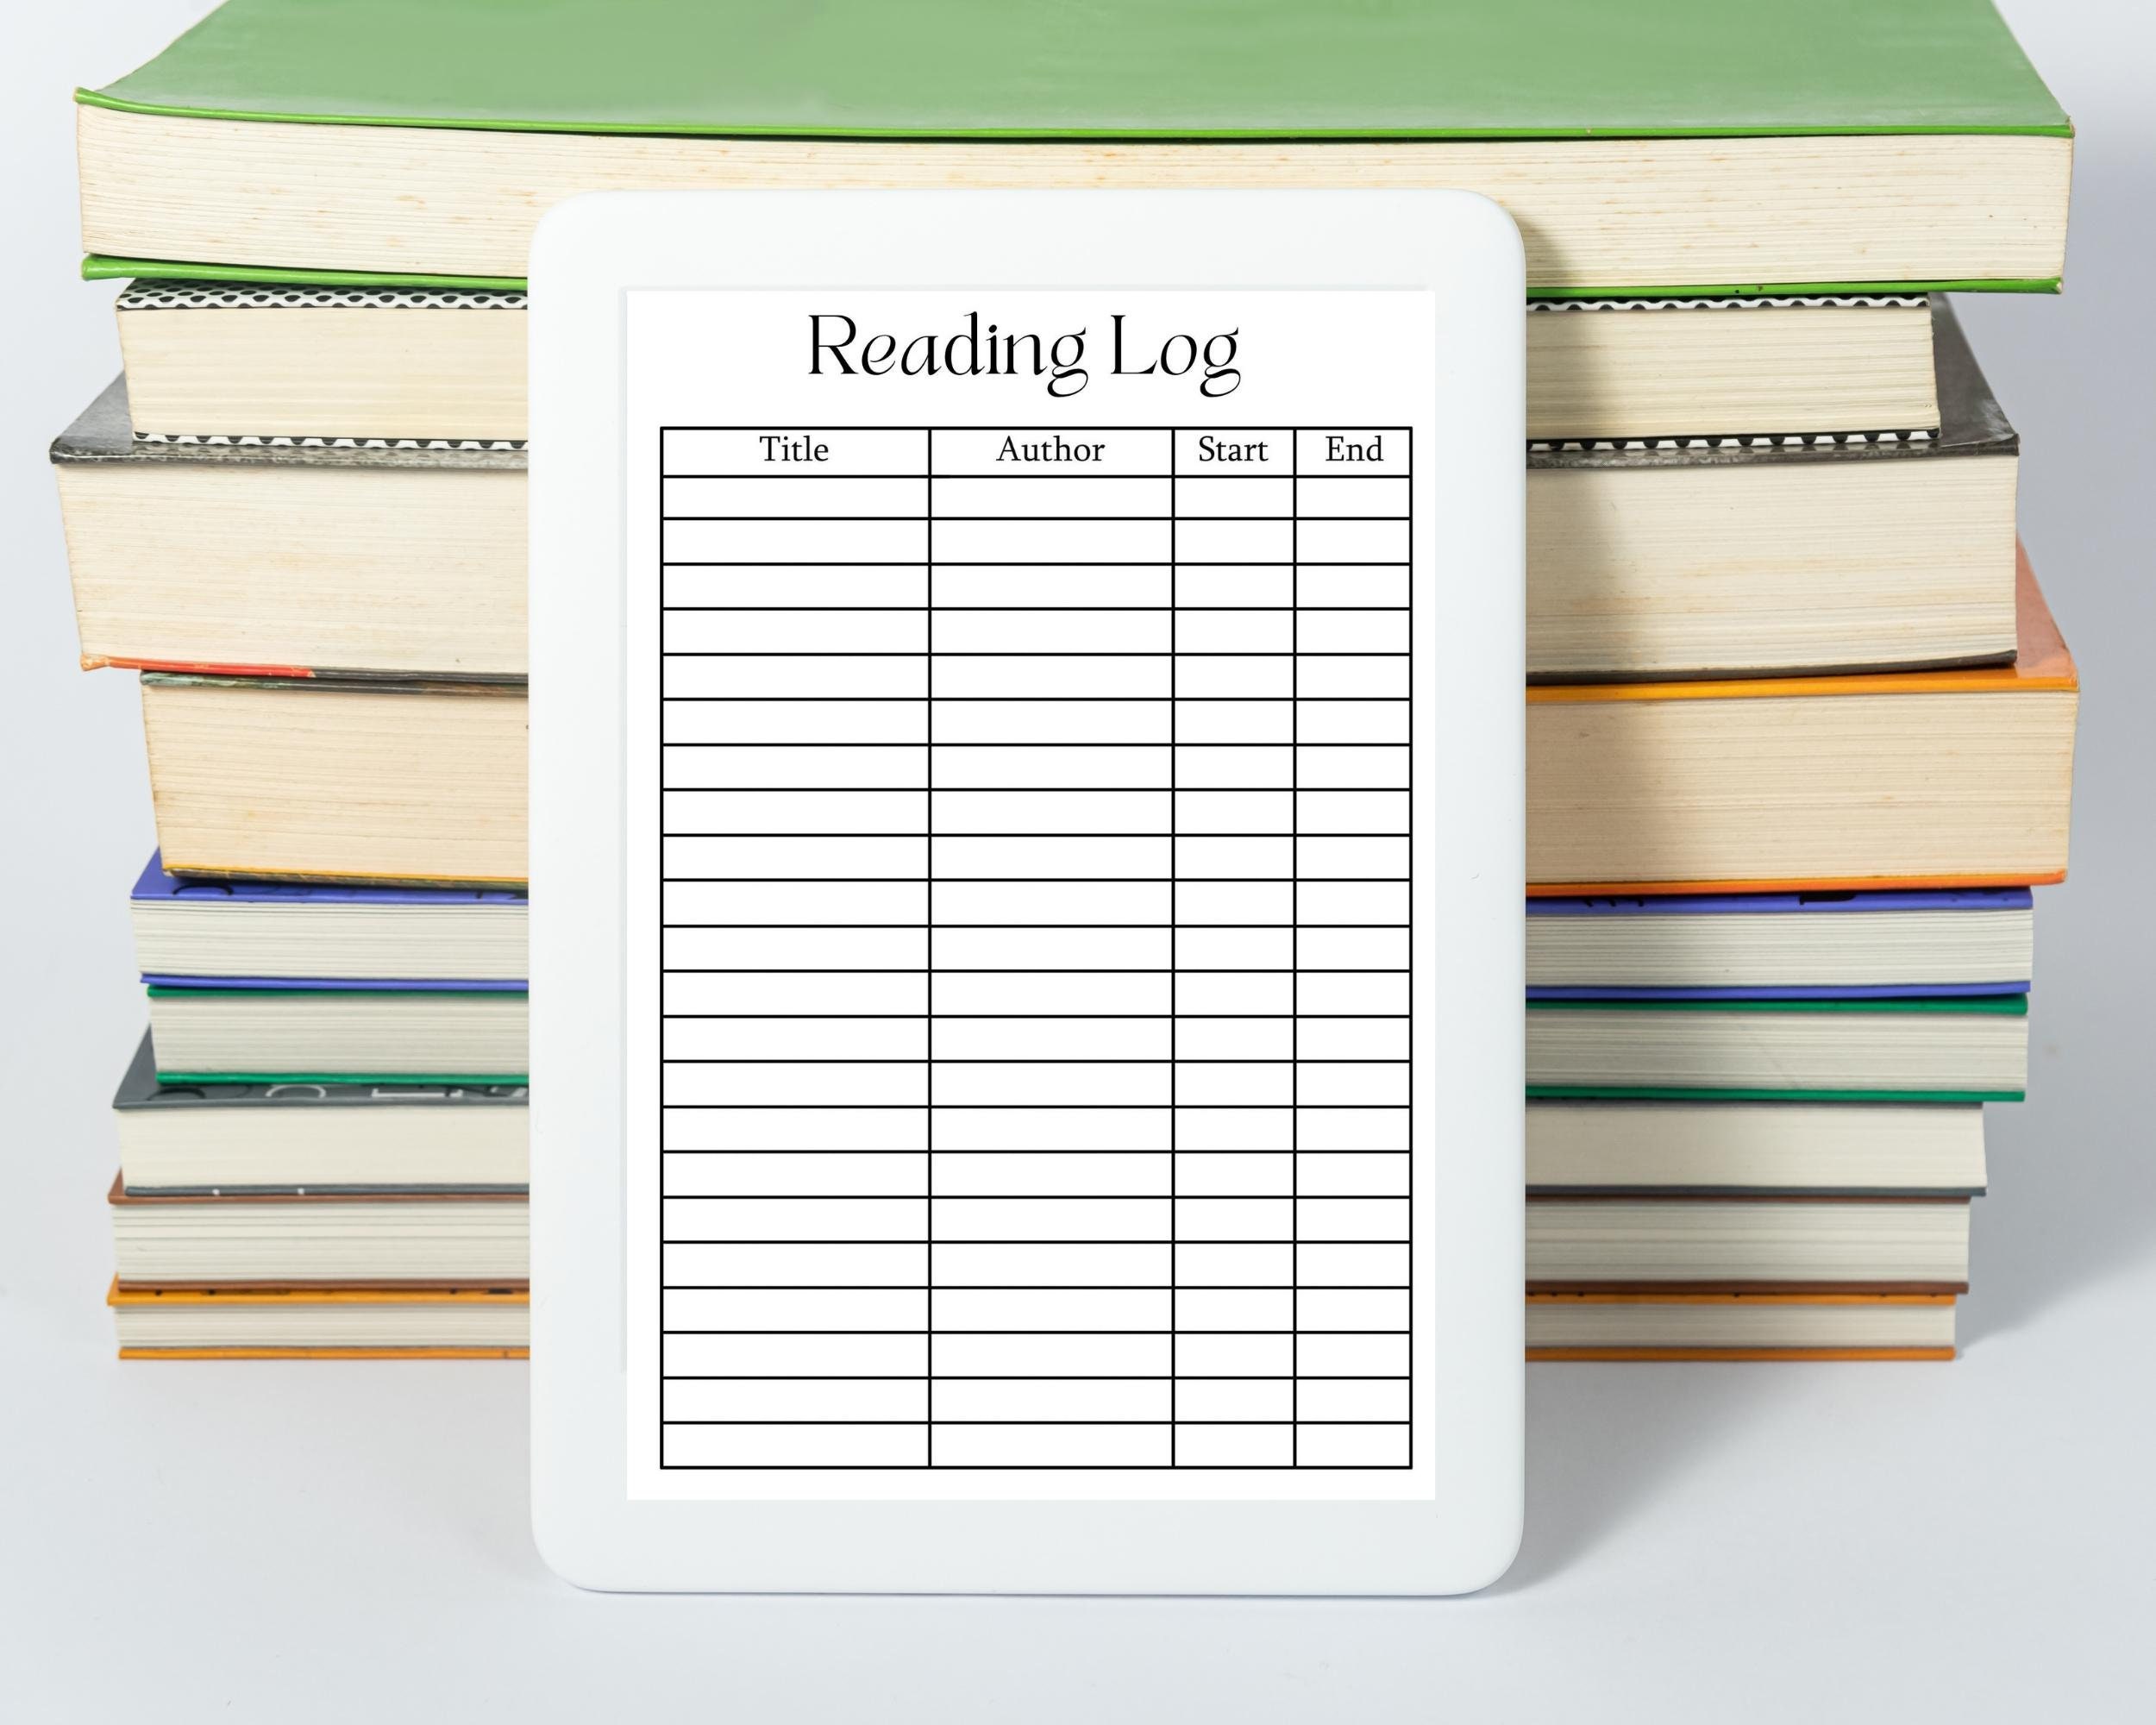 Reading Journal Printable Bundle Personal Wide Book Lovers Planner Inserts  6types Template Reading Review, Log, Tracker, Book Wishlist 